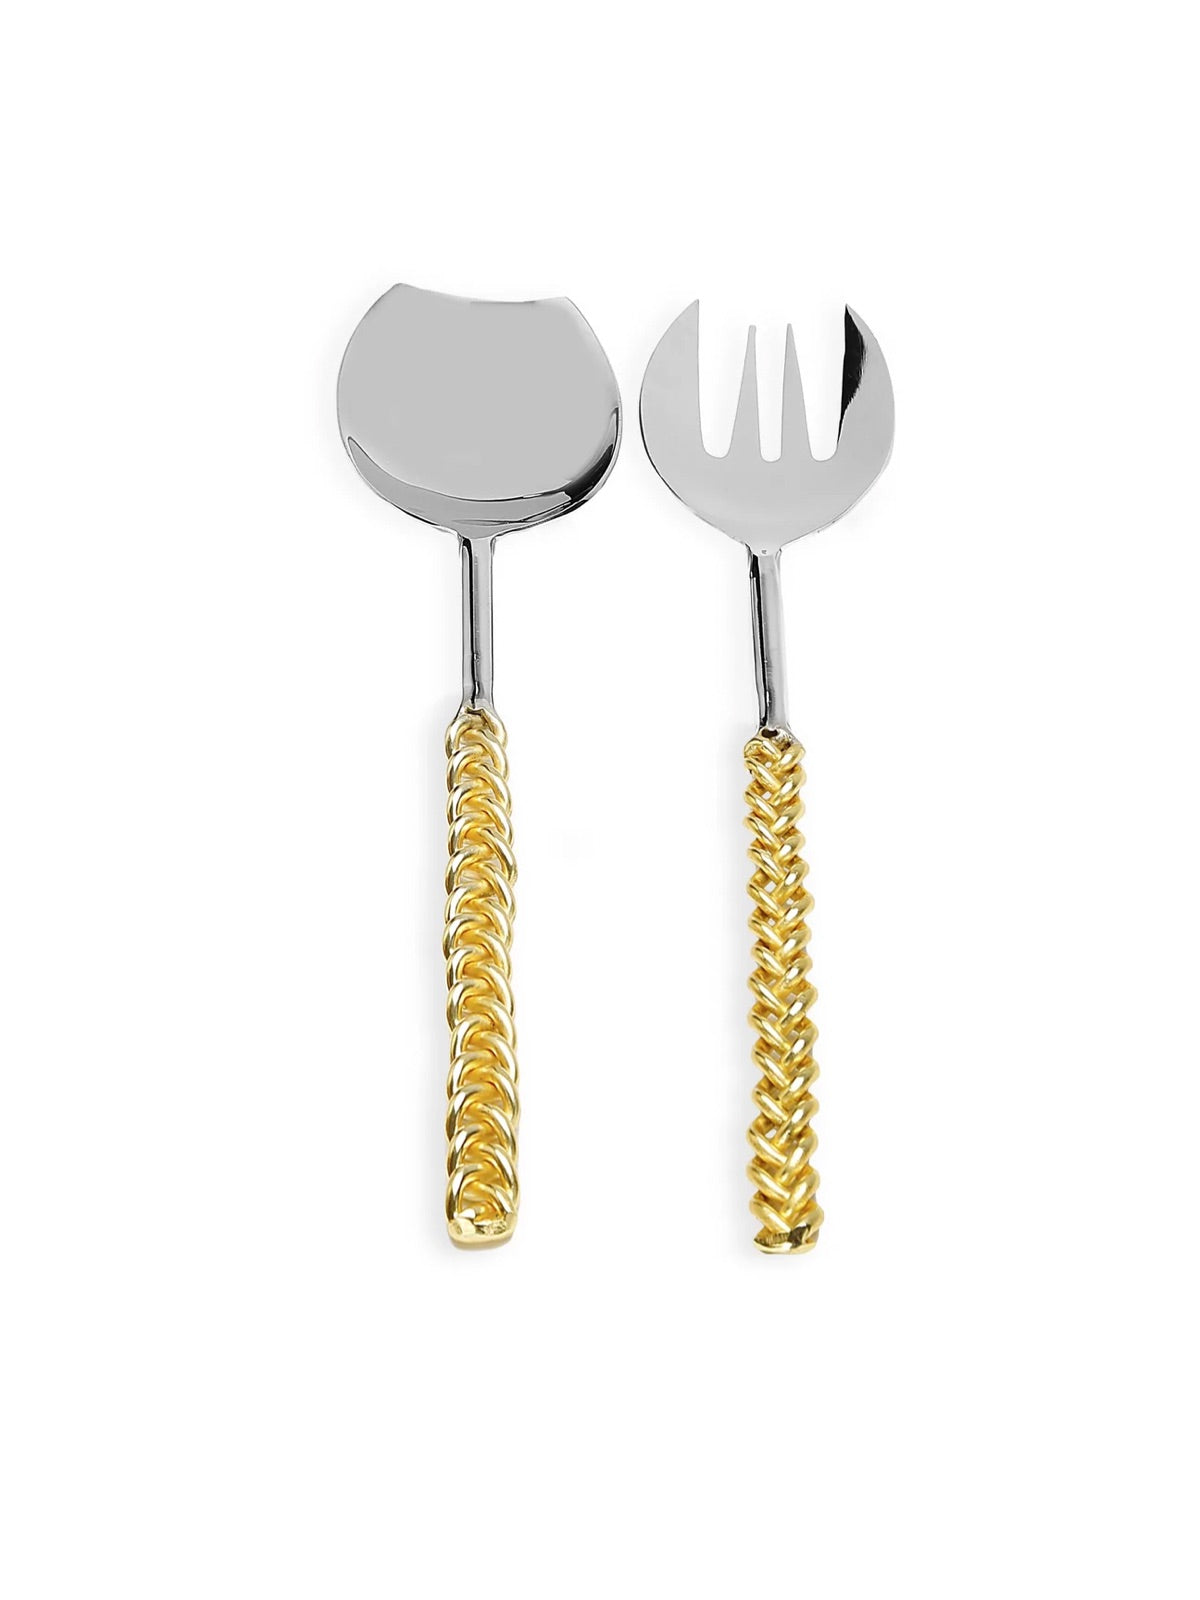 These Two 12in Salad Servers are handcrafted of stainless steel and gold twisted lustrous handles that will look glorious on any table. Sold by KYA Home Decor